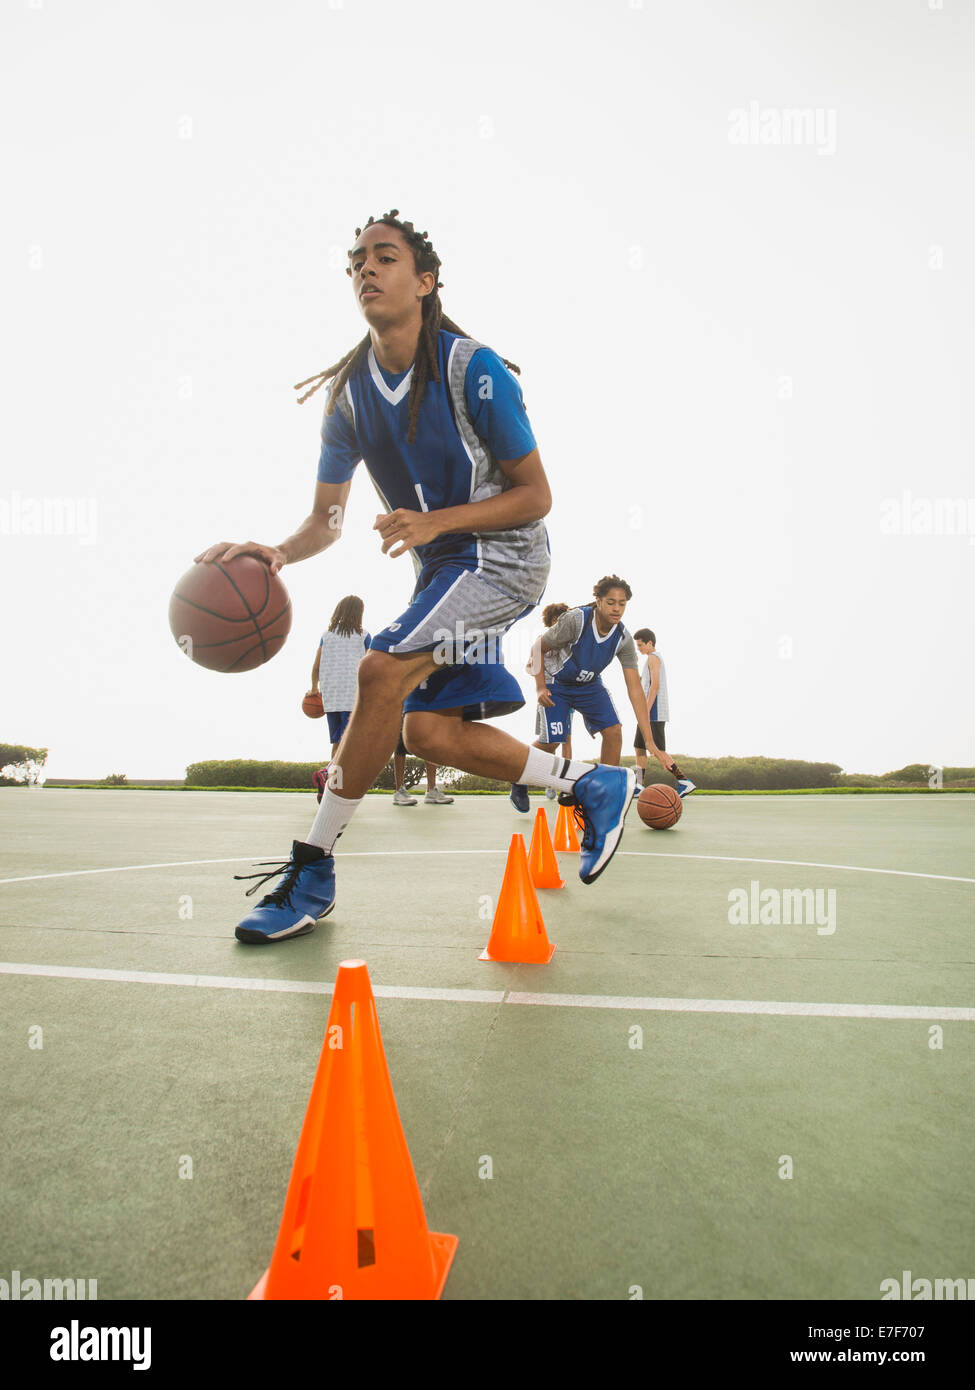 Basketball team doing drills at practice Stock Photo - Alamy